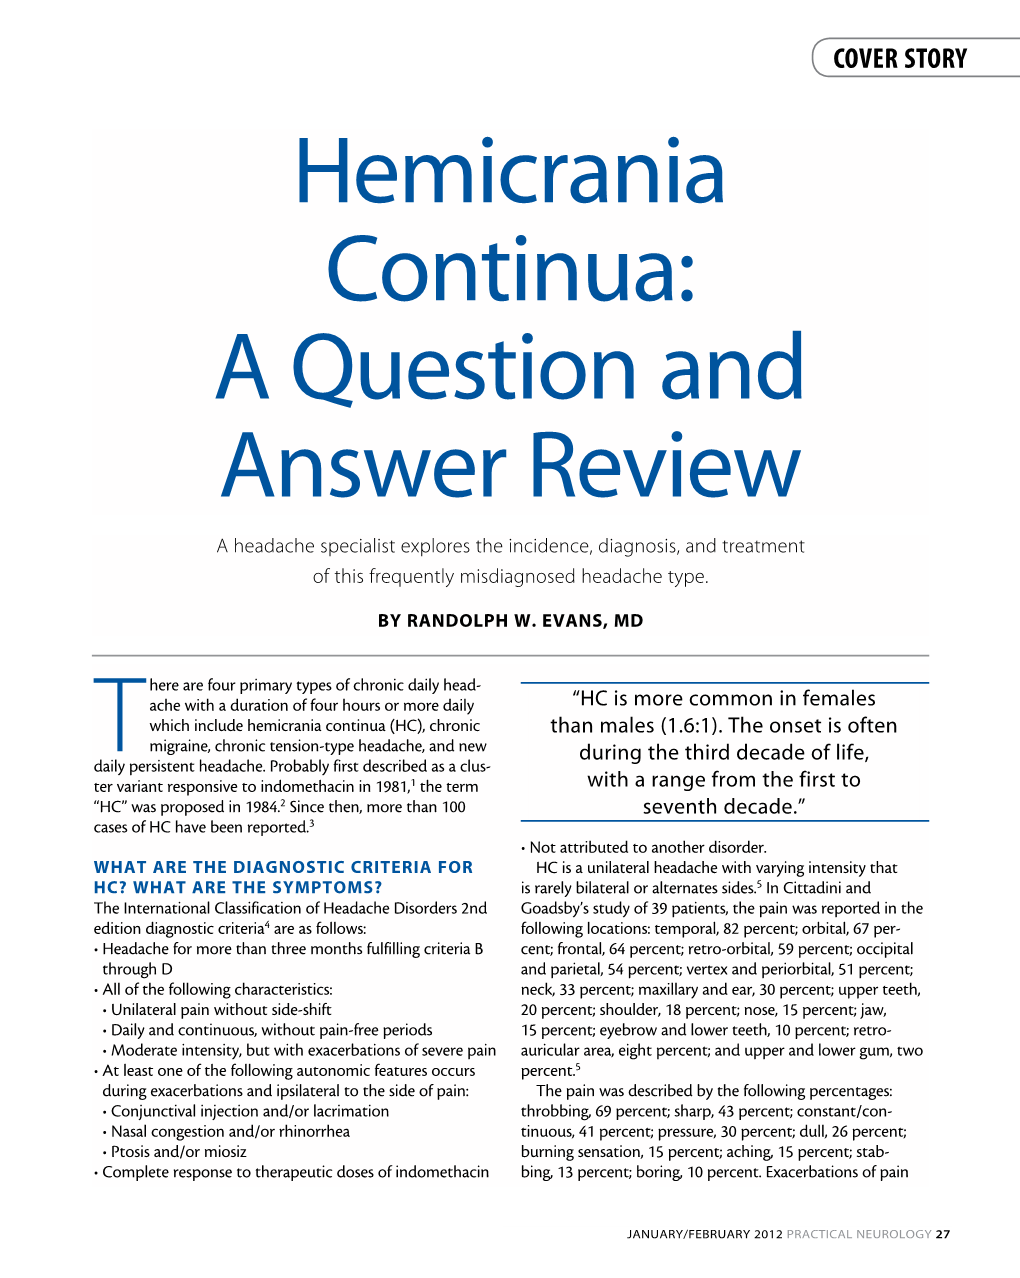 Hemicrania Continua: a Question and Answer Review a Headache Specialist Explores the Incidence, Diagnosis, and Treatment of This Frequently Misdiagnosed Headache Type